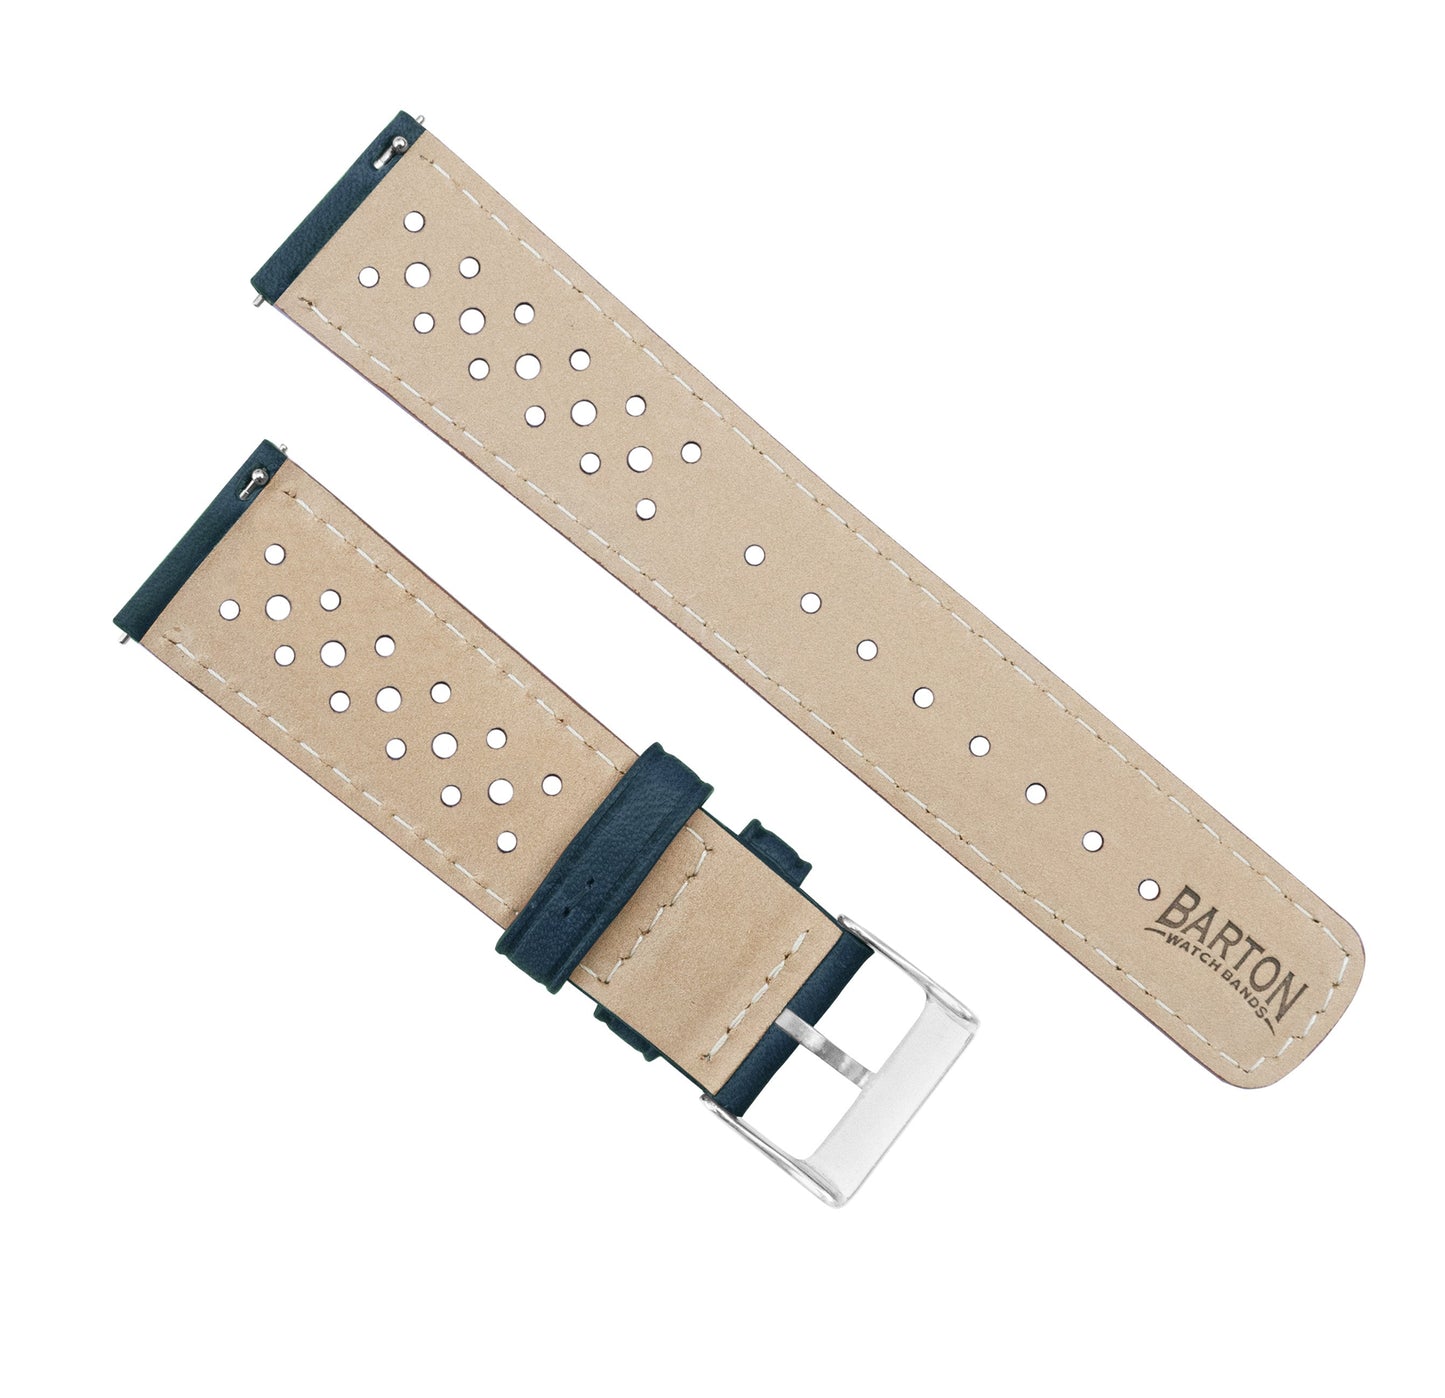 MOONSWATCH Bip | Racing Horween Leather | Navy Blue - Barton Watch Bands